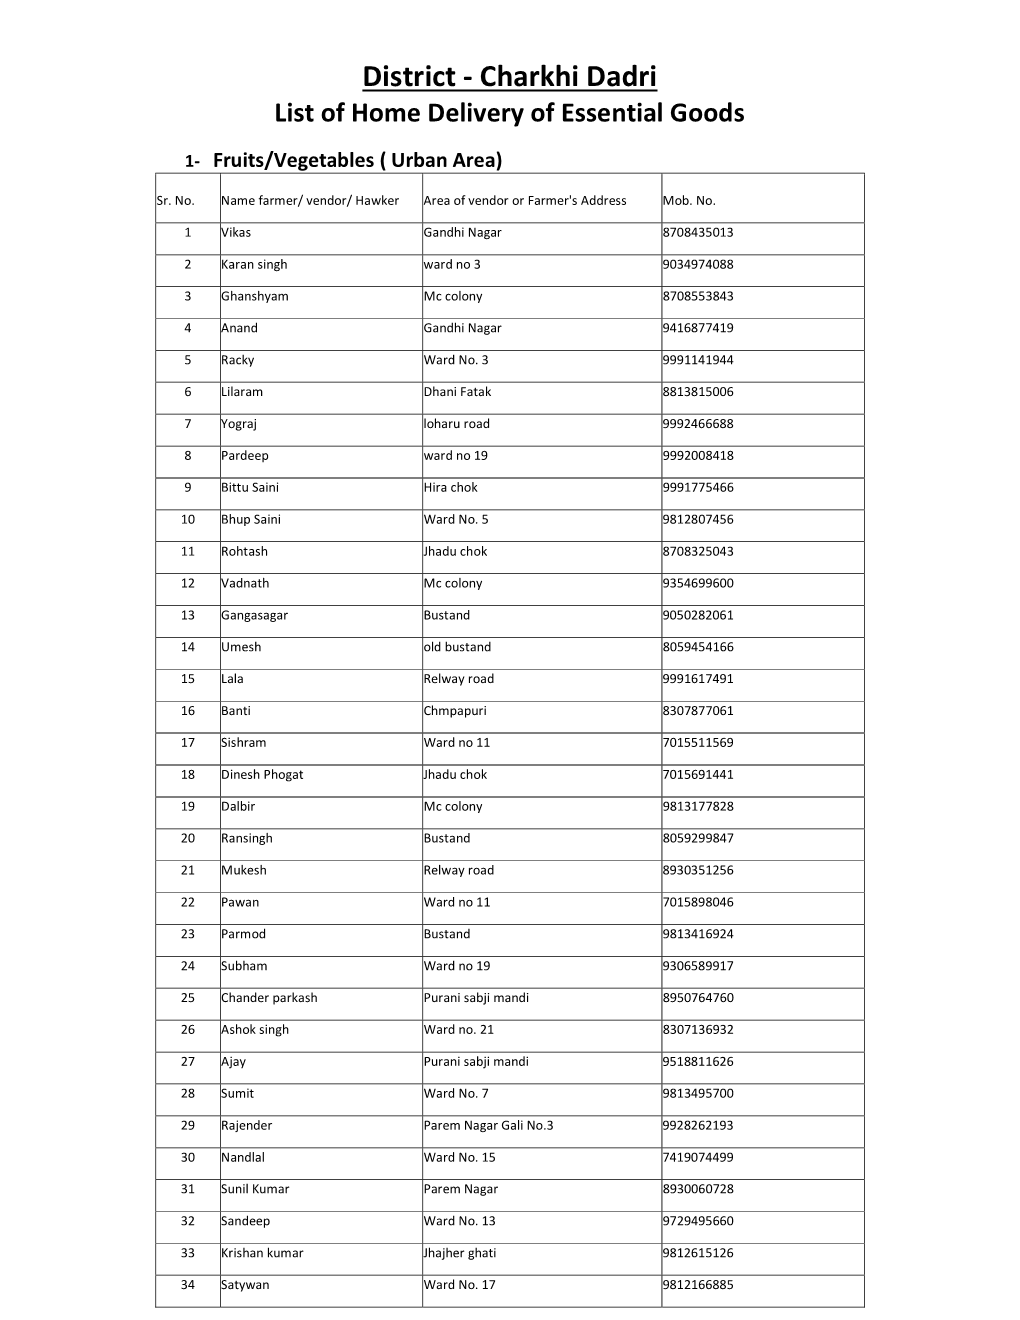 District - Charkhi Dadri List of Home Delivery of Essential Goods